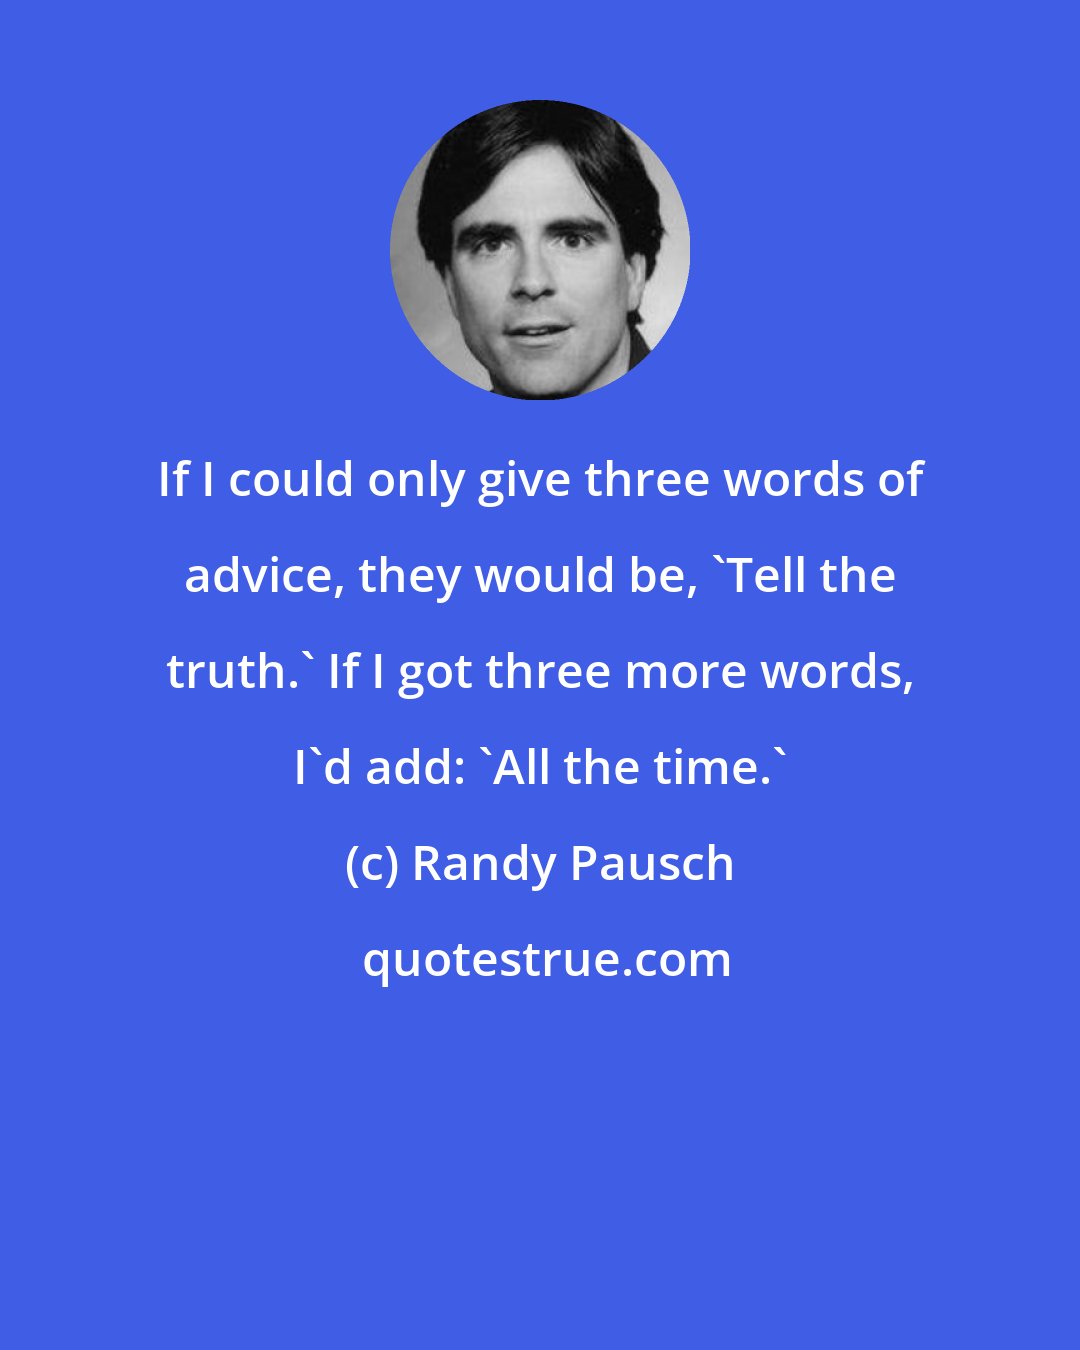 Randy Pausch: If I could only give three words of advice, they would be, 'Tell the truth.' If I got three more words, I'd add: 'All the time.'